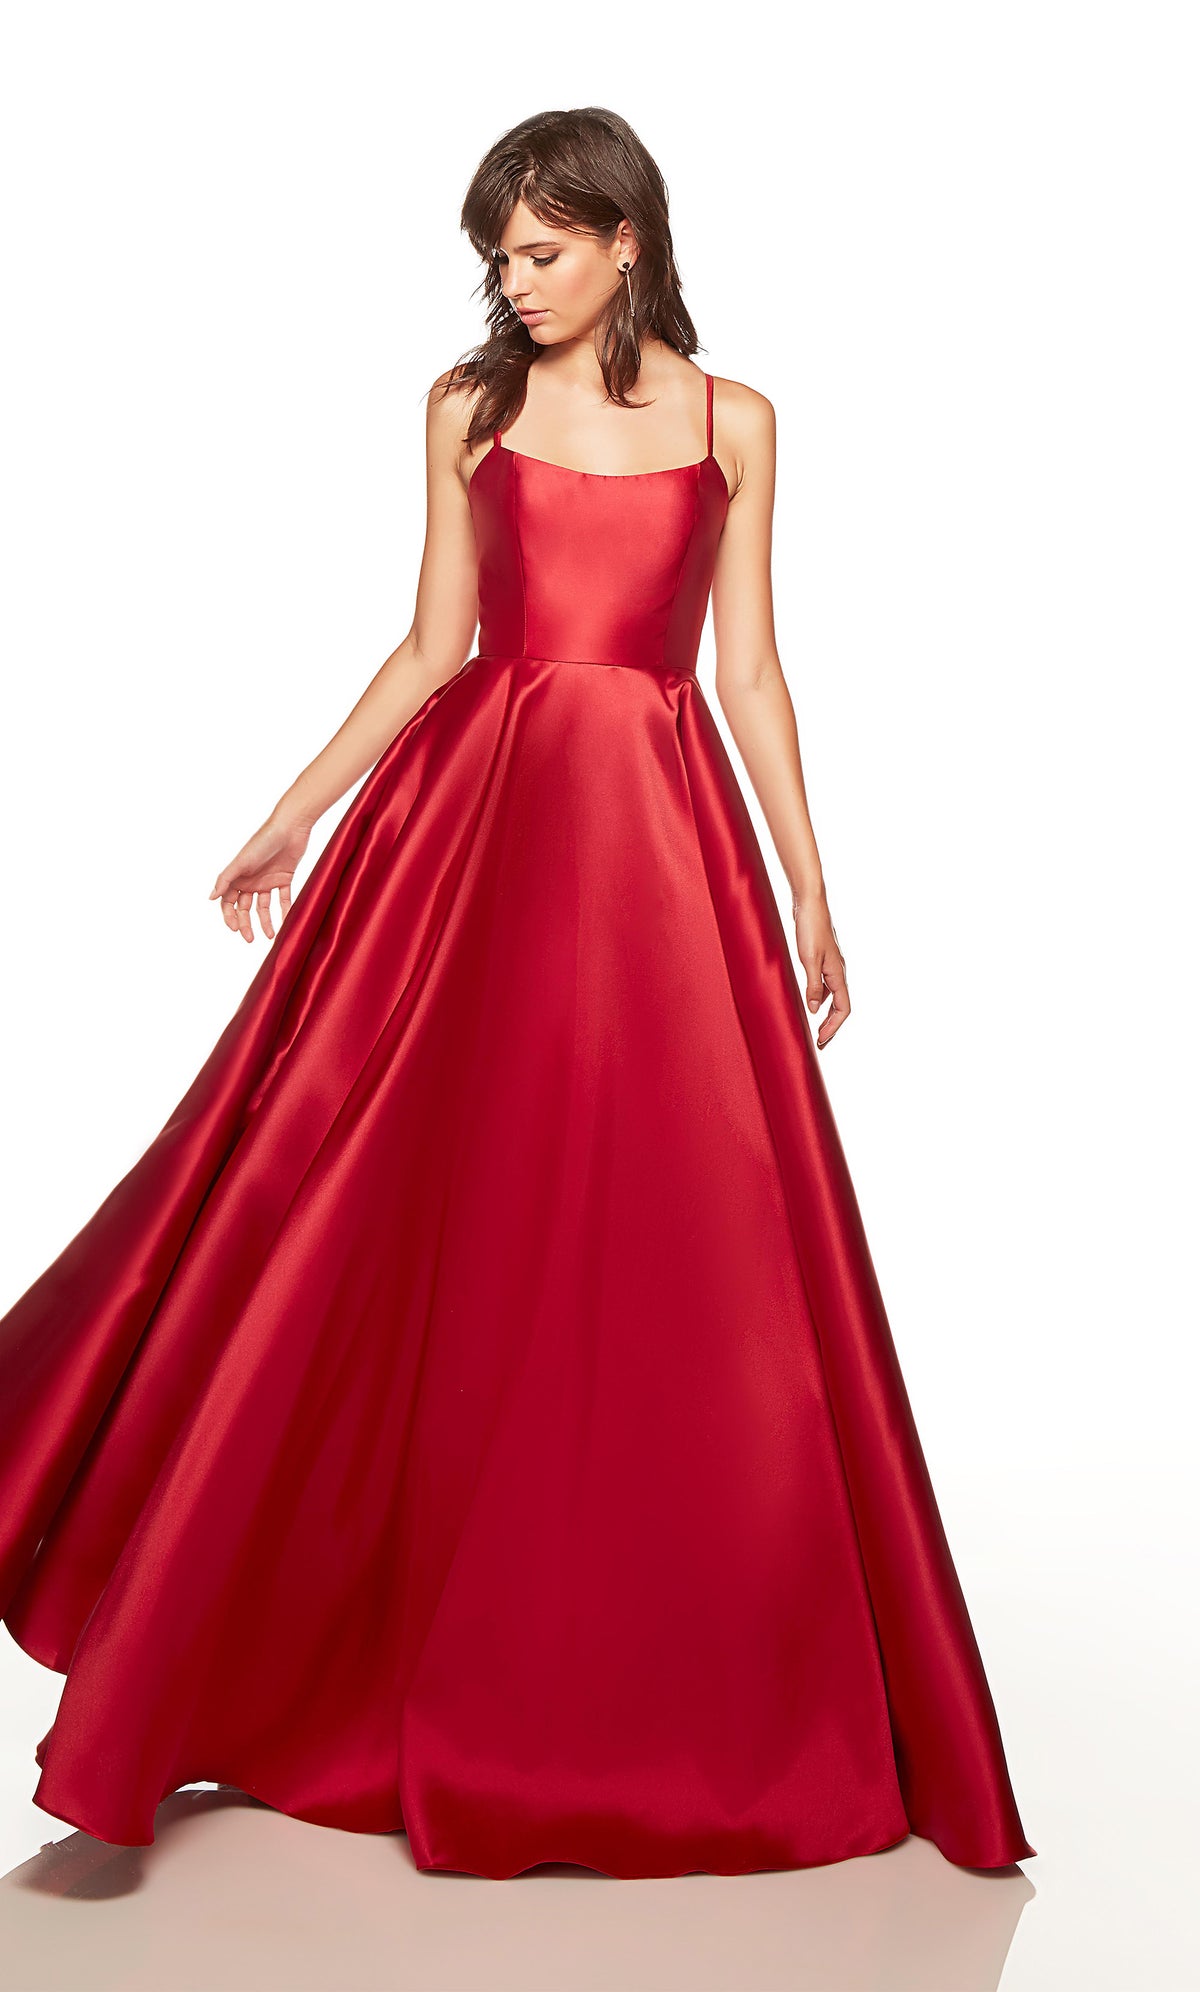 Red formal dress with a scoop neck and pockets.